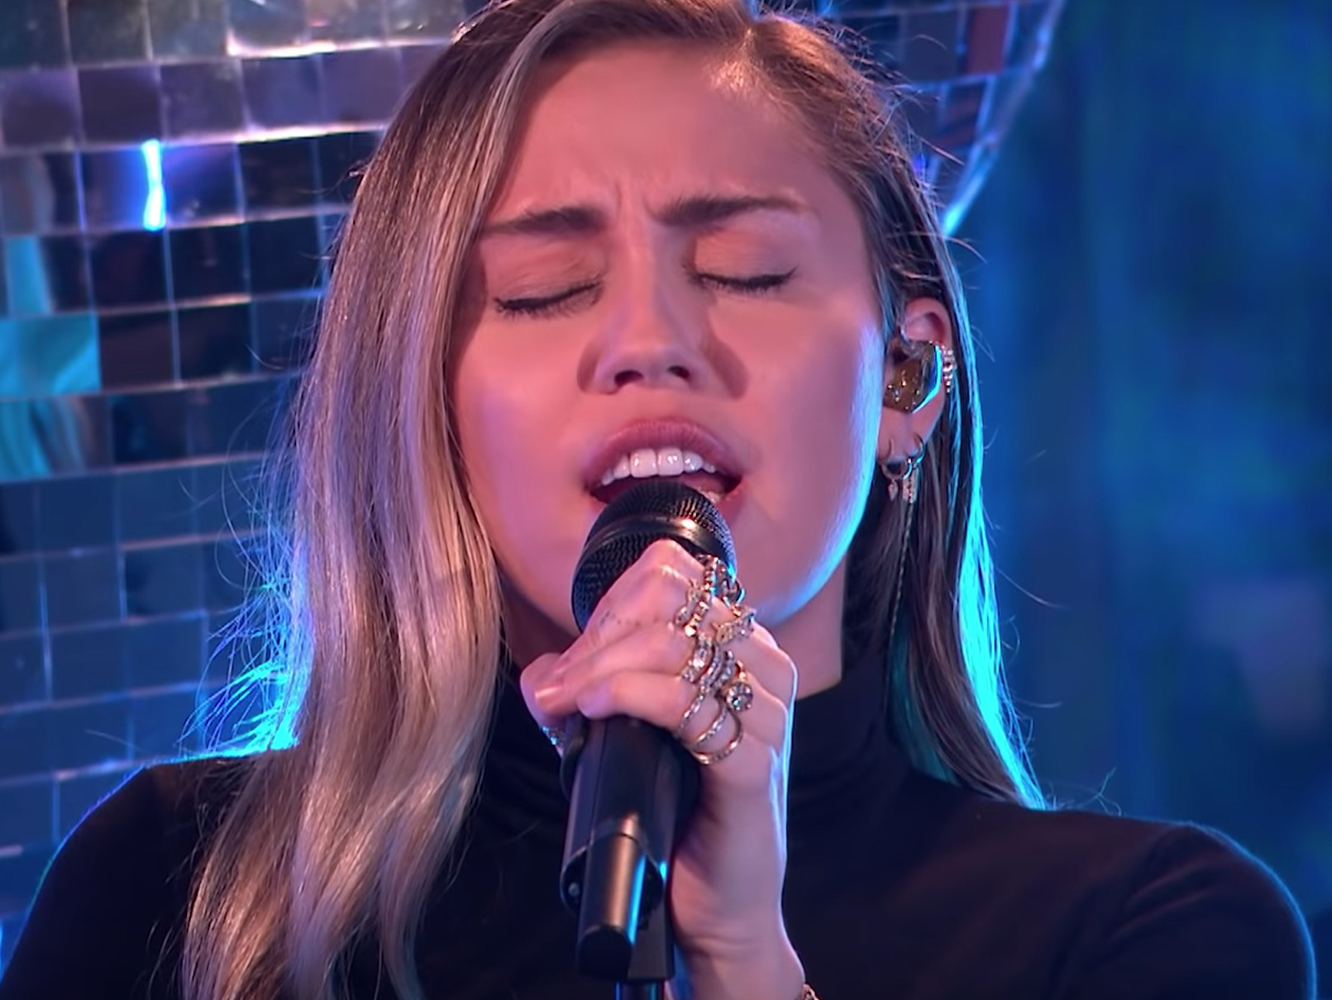  Miley Cyrus y Mark Ronson bordan ‘Nothing Breaks Like A Heart’ y ‘No Tears Left To Cry’